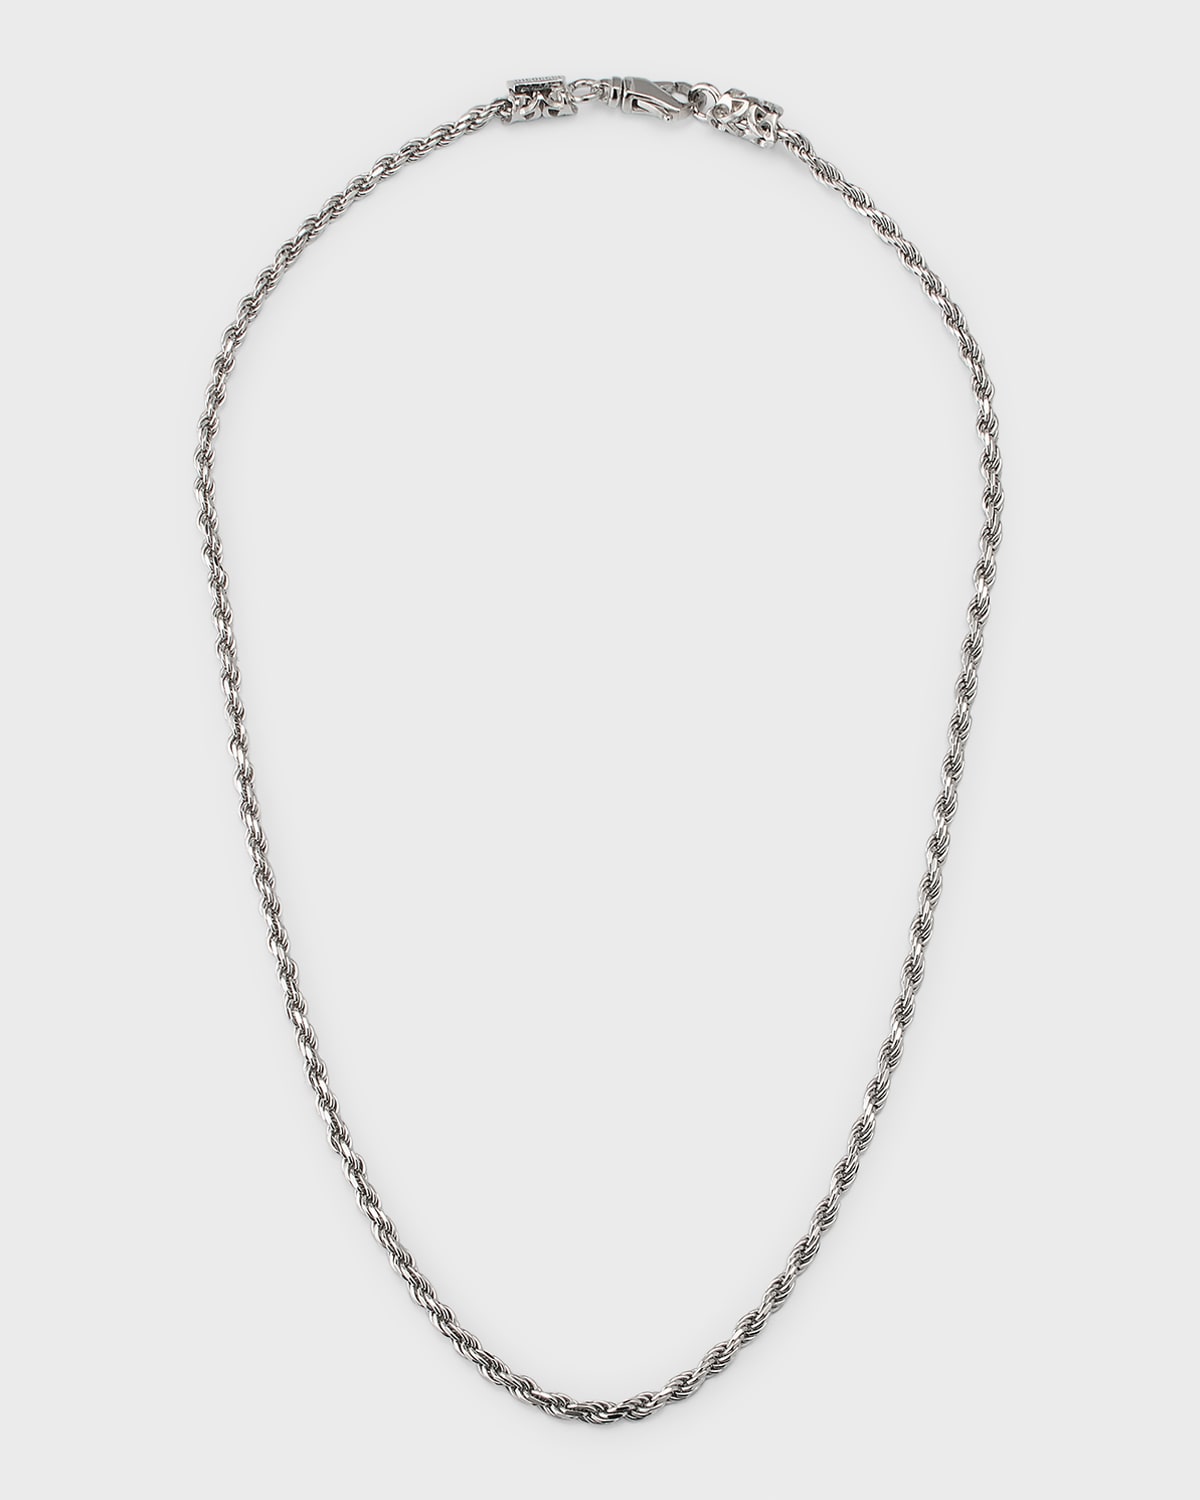 Emanuele Bicocchi Men's Sterling Silver Thin Rope Chain Necklace, 22"l